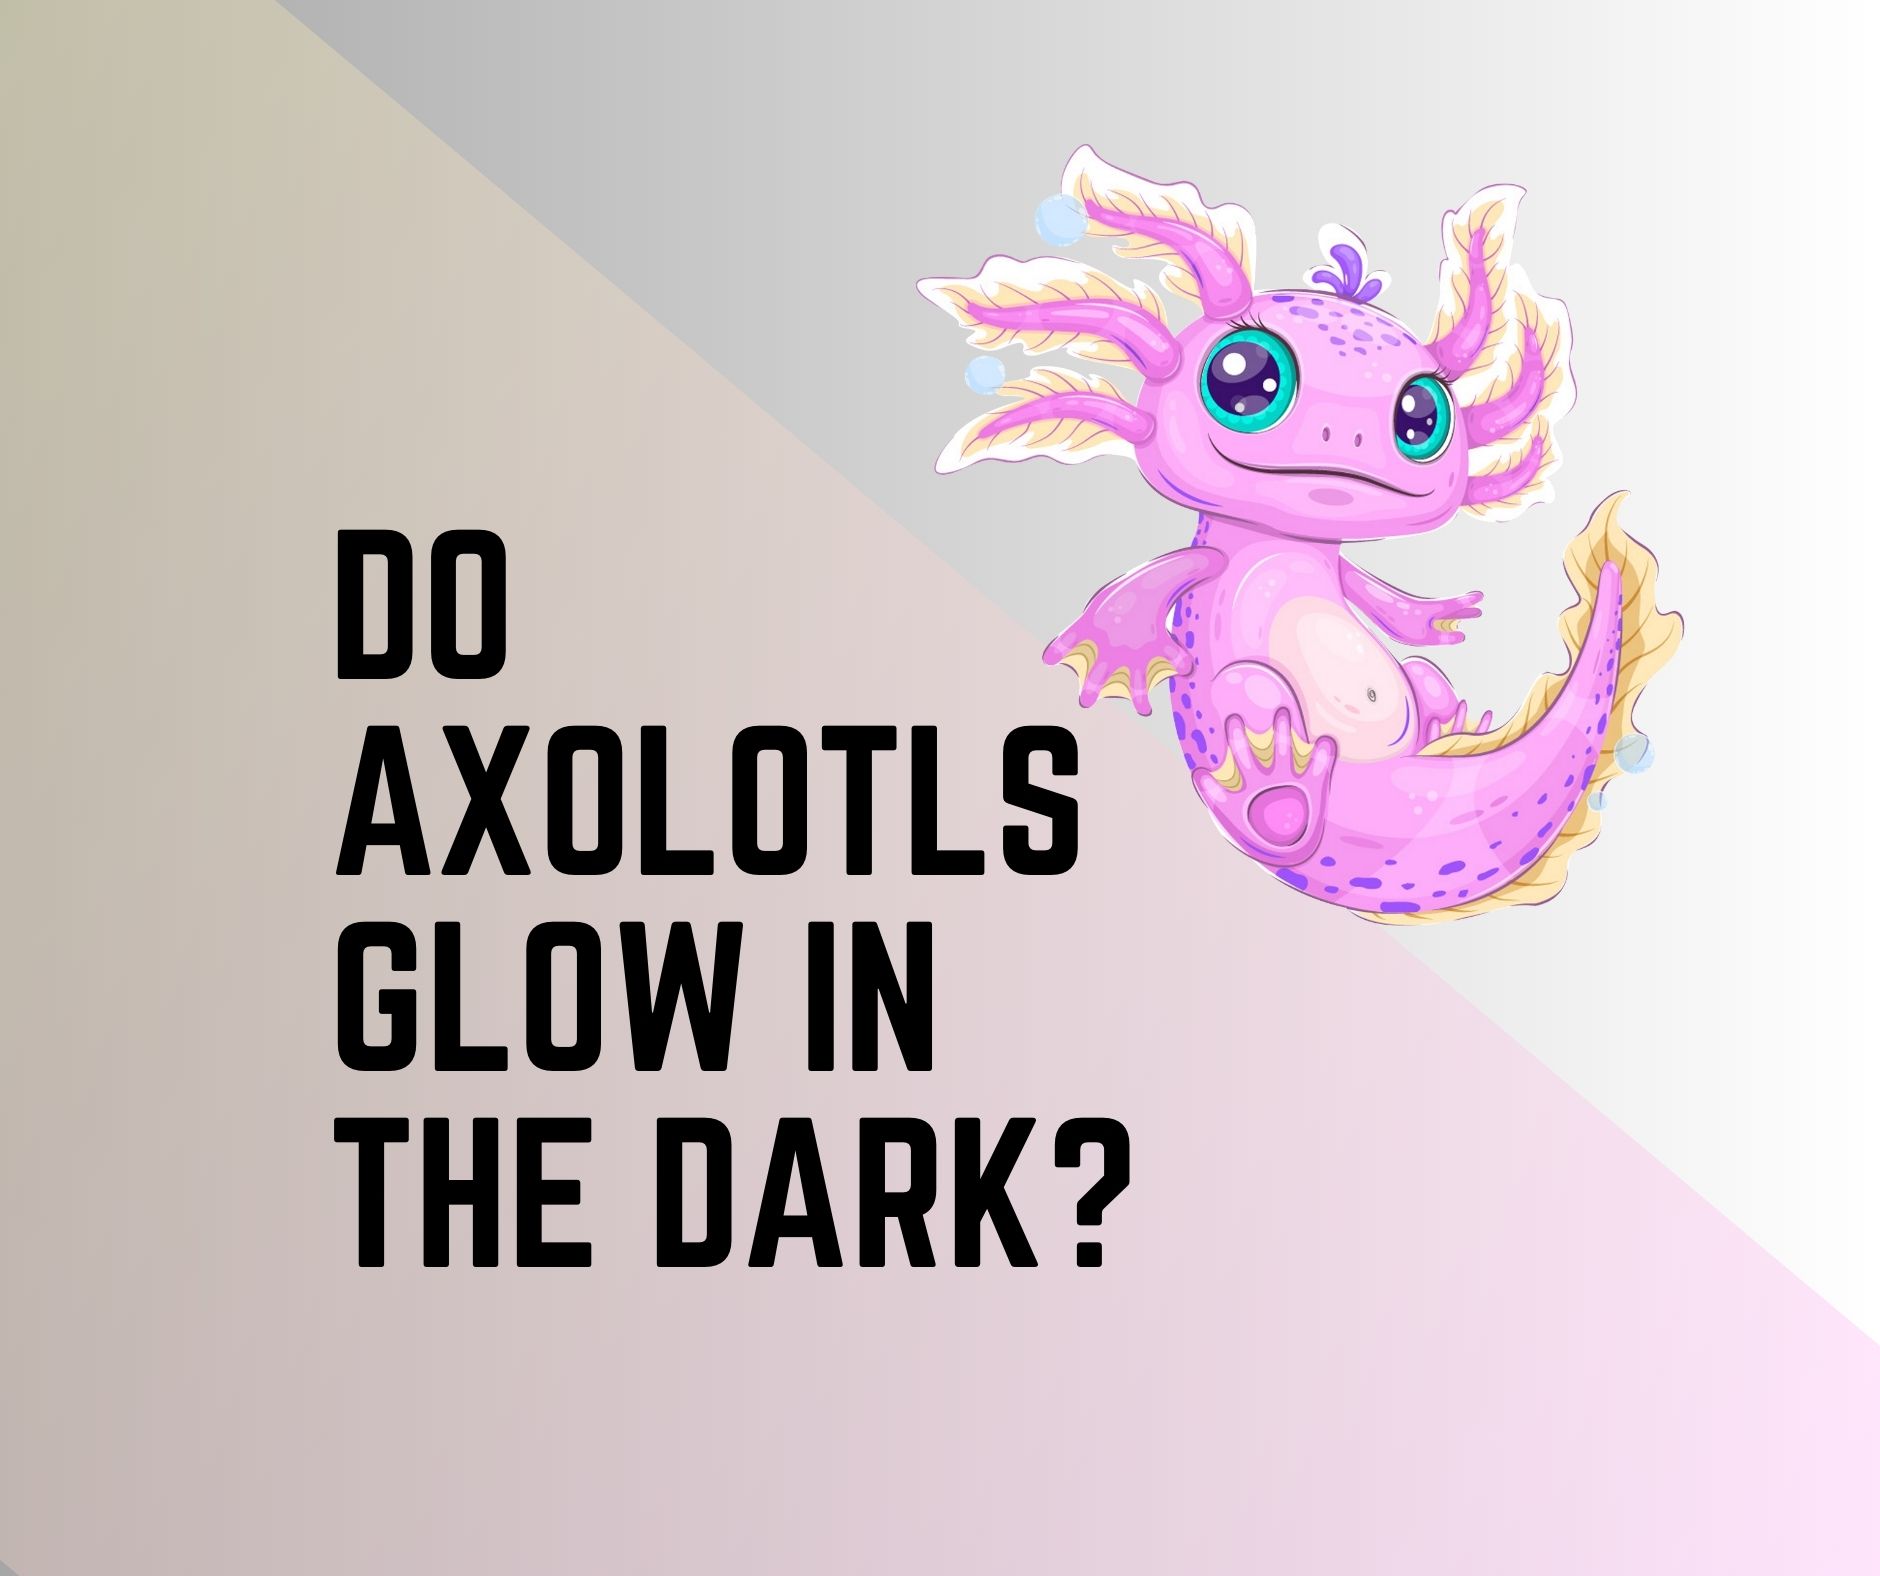 Do Axolotls Glow In The Dark If yes, Why